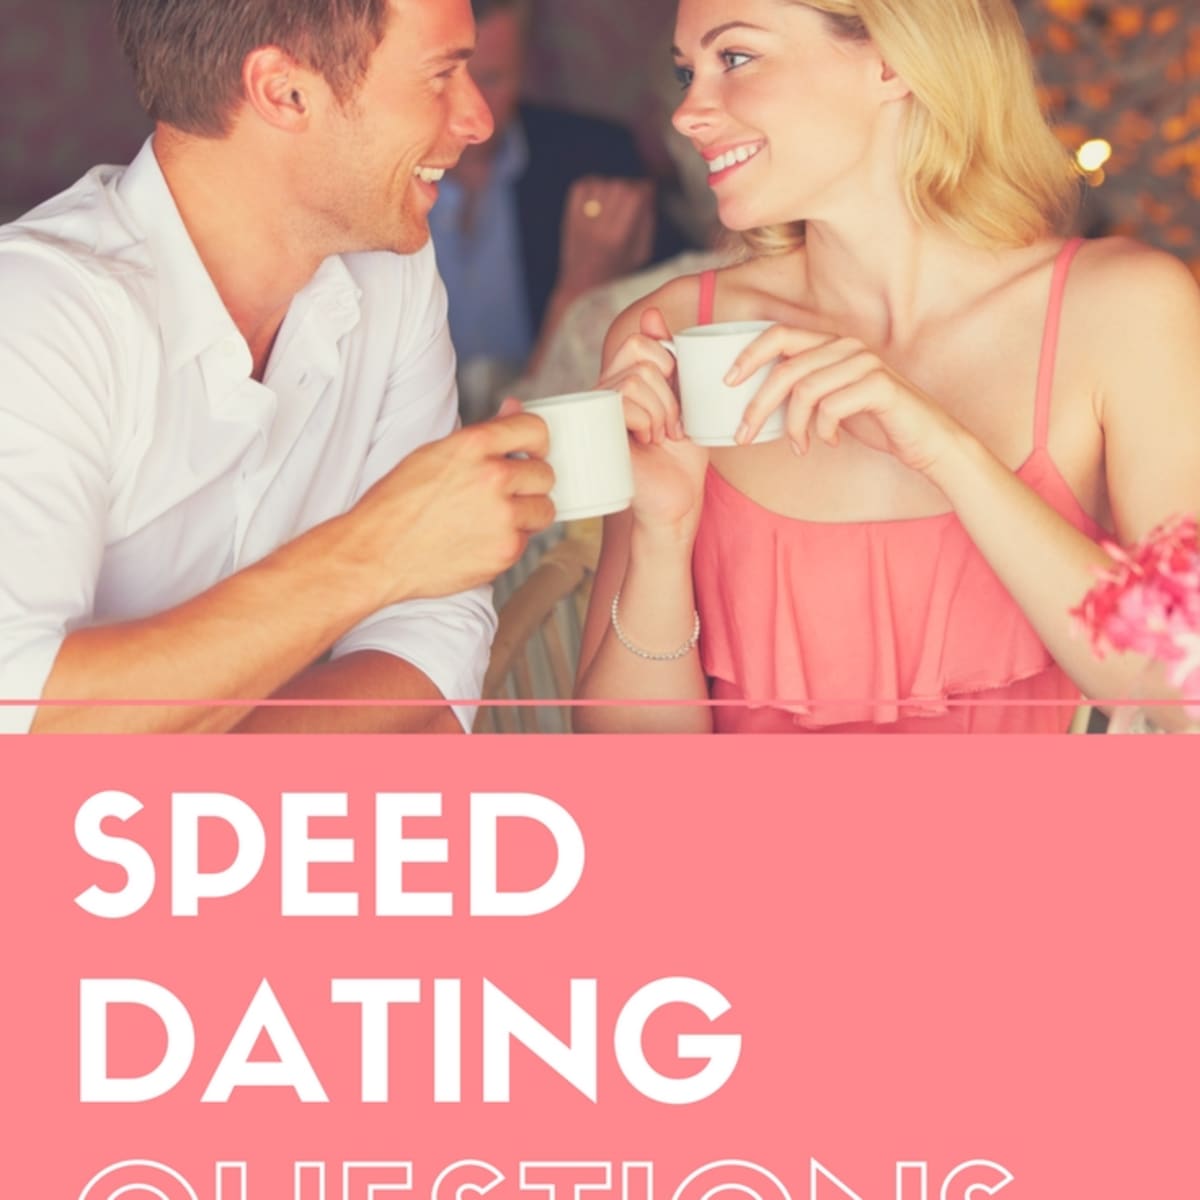 Fun Questions To Ask Speed Dating - 77 Best Speed Dating Questions